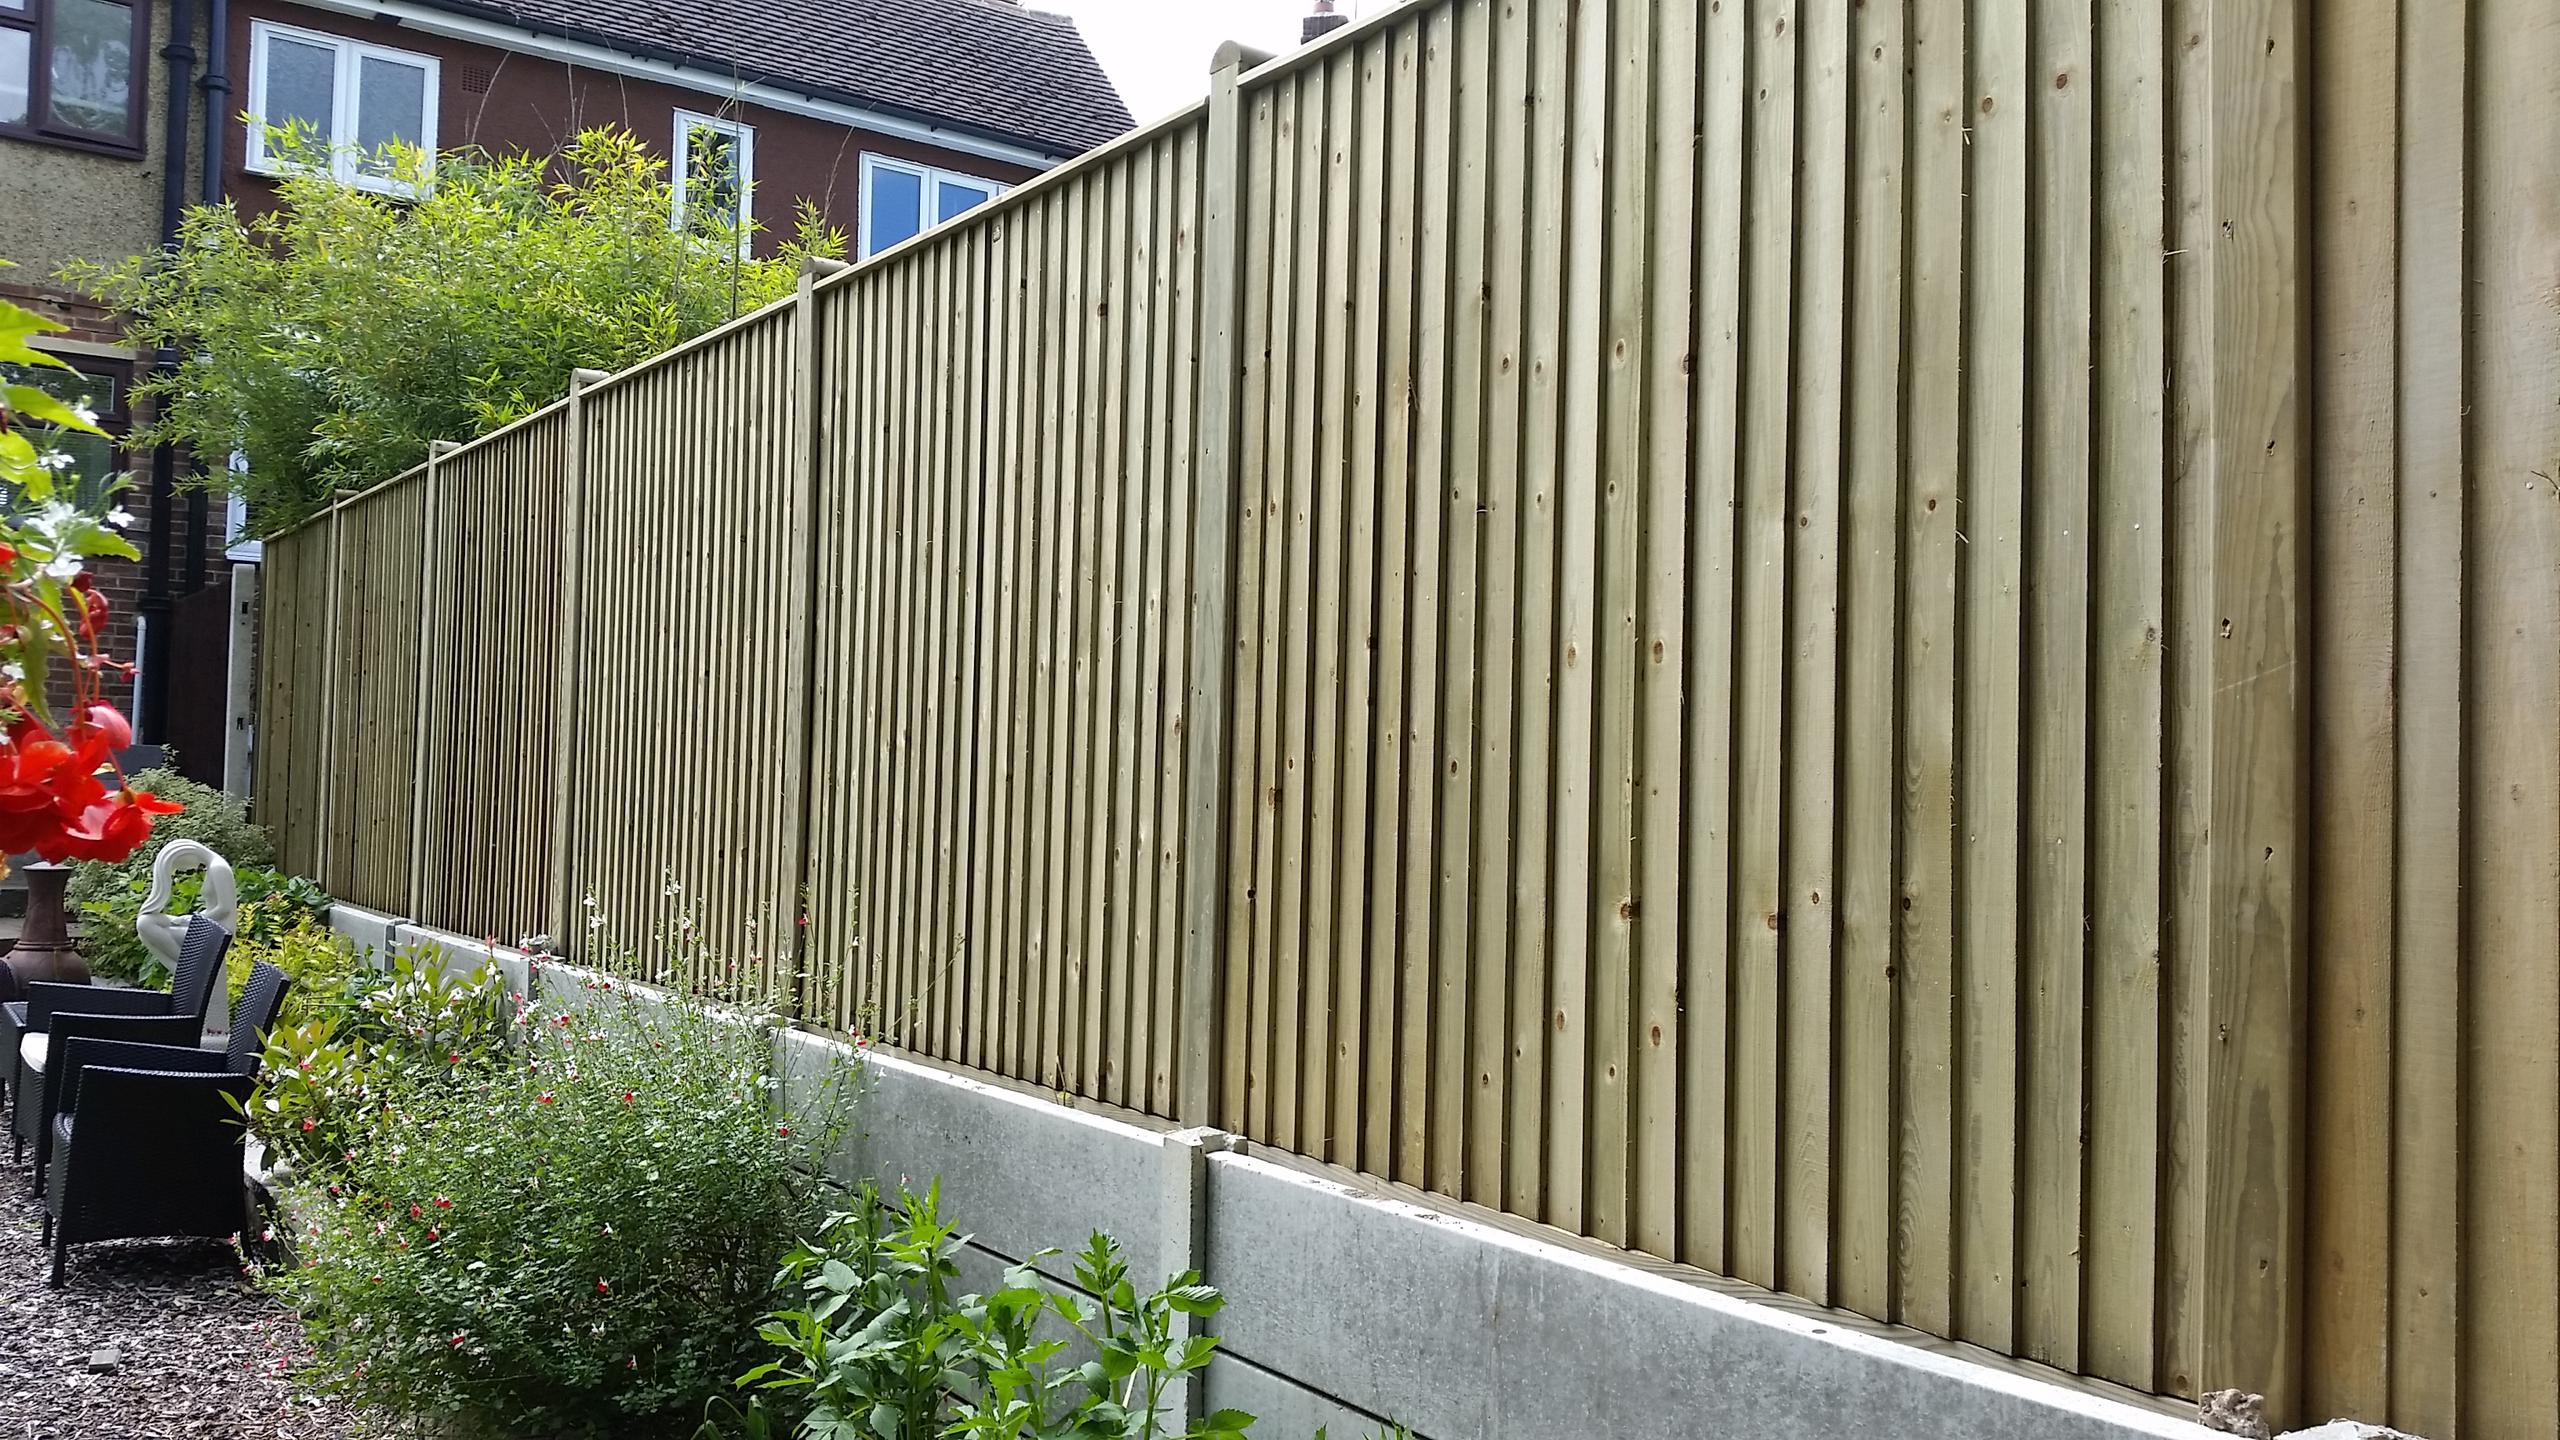 Jackson fencing installed by sheridan fencing in Davis estate, Chatham